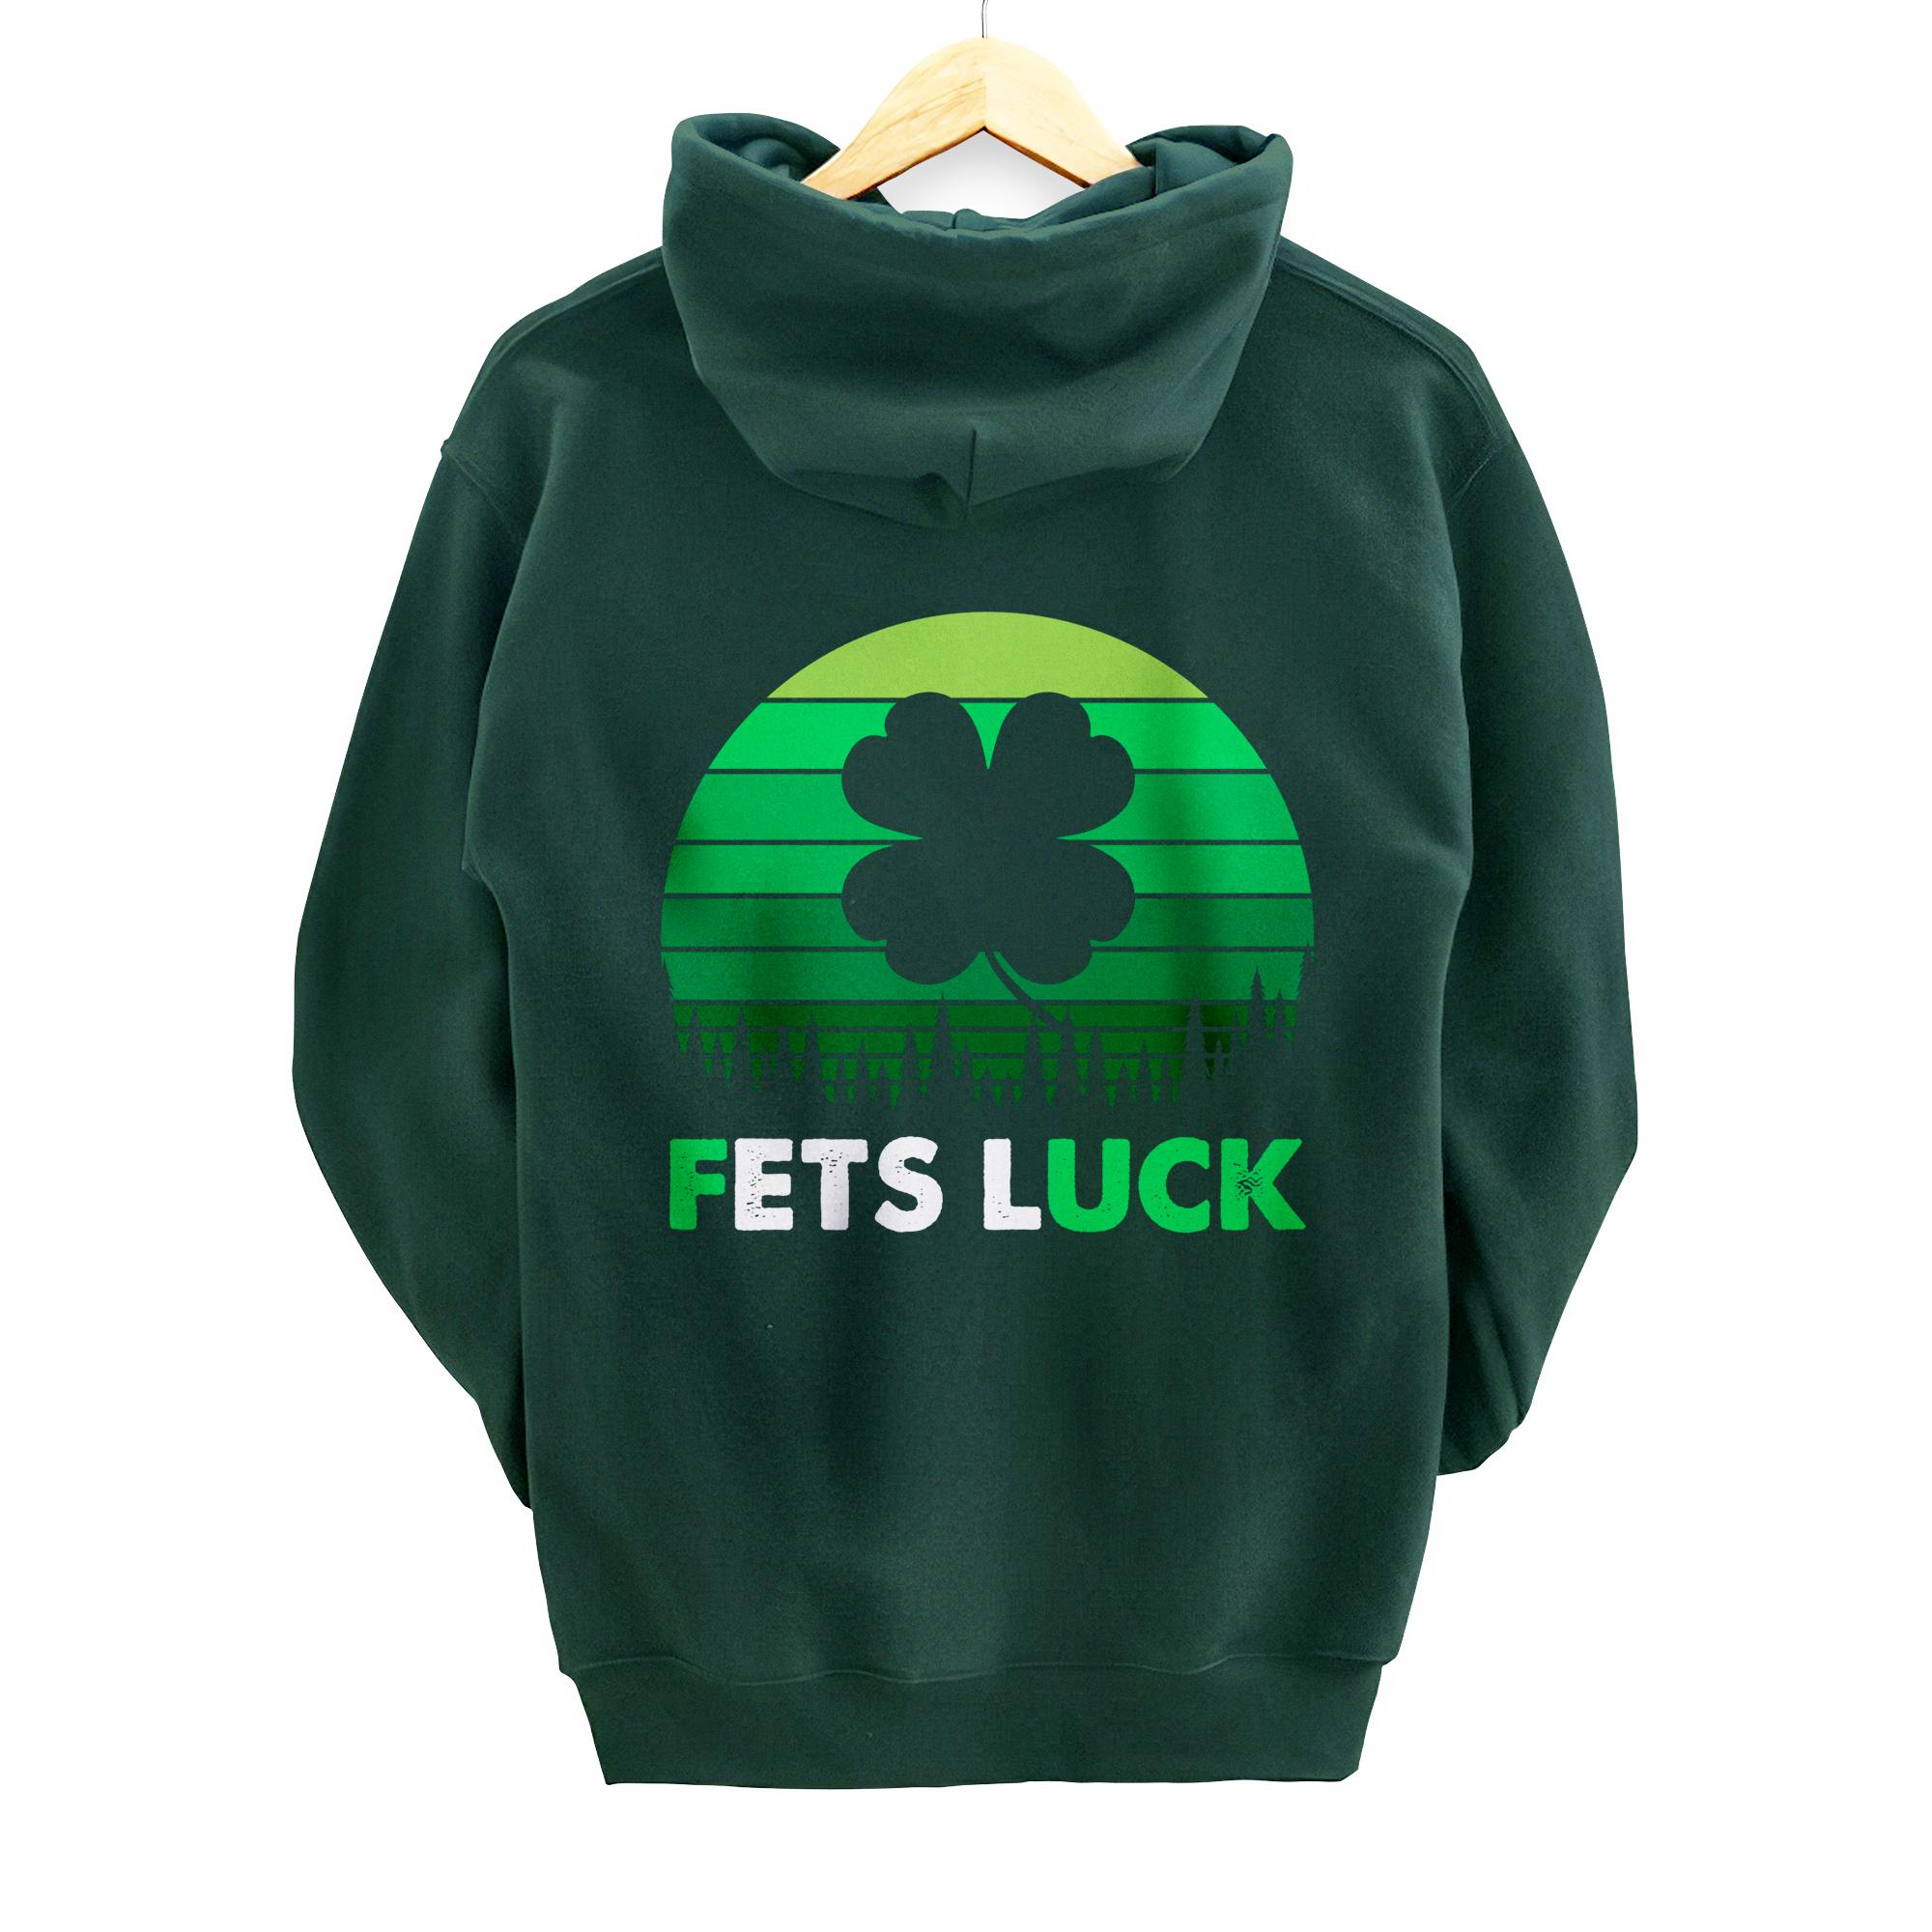 Fets Luck St Patricks Day Gift Inappropriate Adult Sex Humor Pullover Hoodie